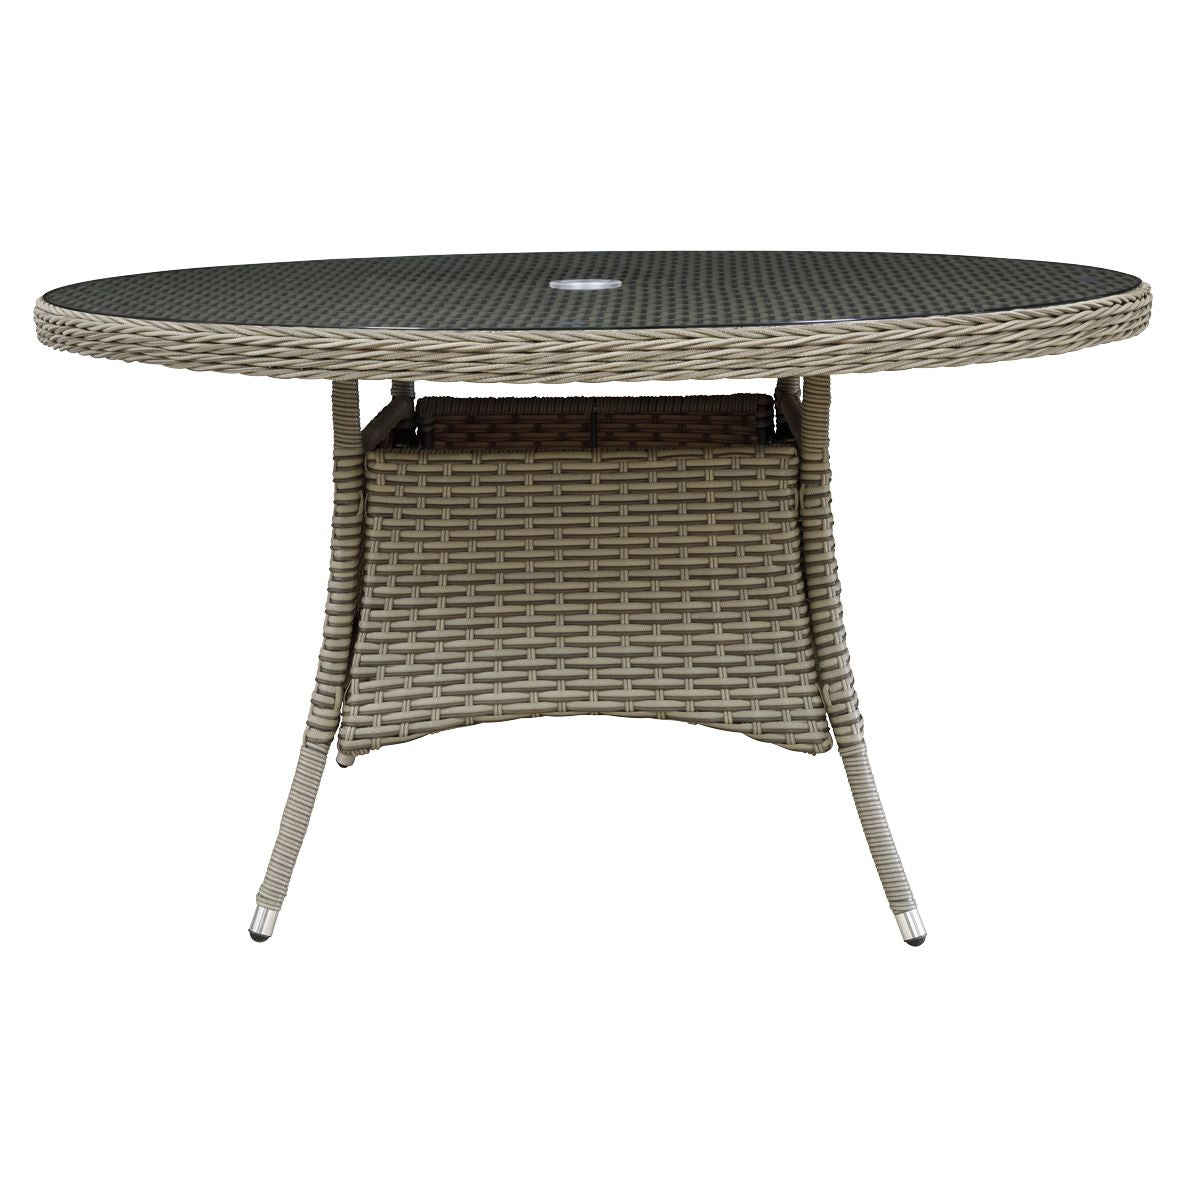 Dellonda Chester Rattan Wicker Outdoor Dining Table with Tempered Glass Top